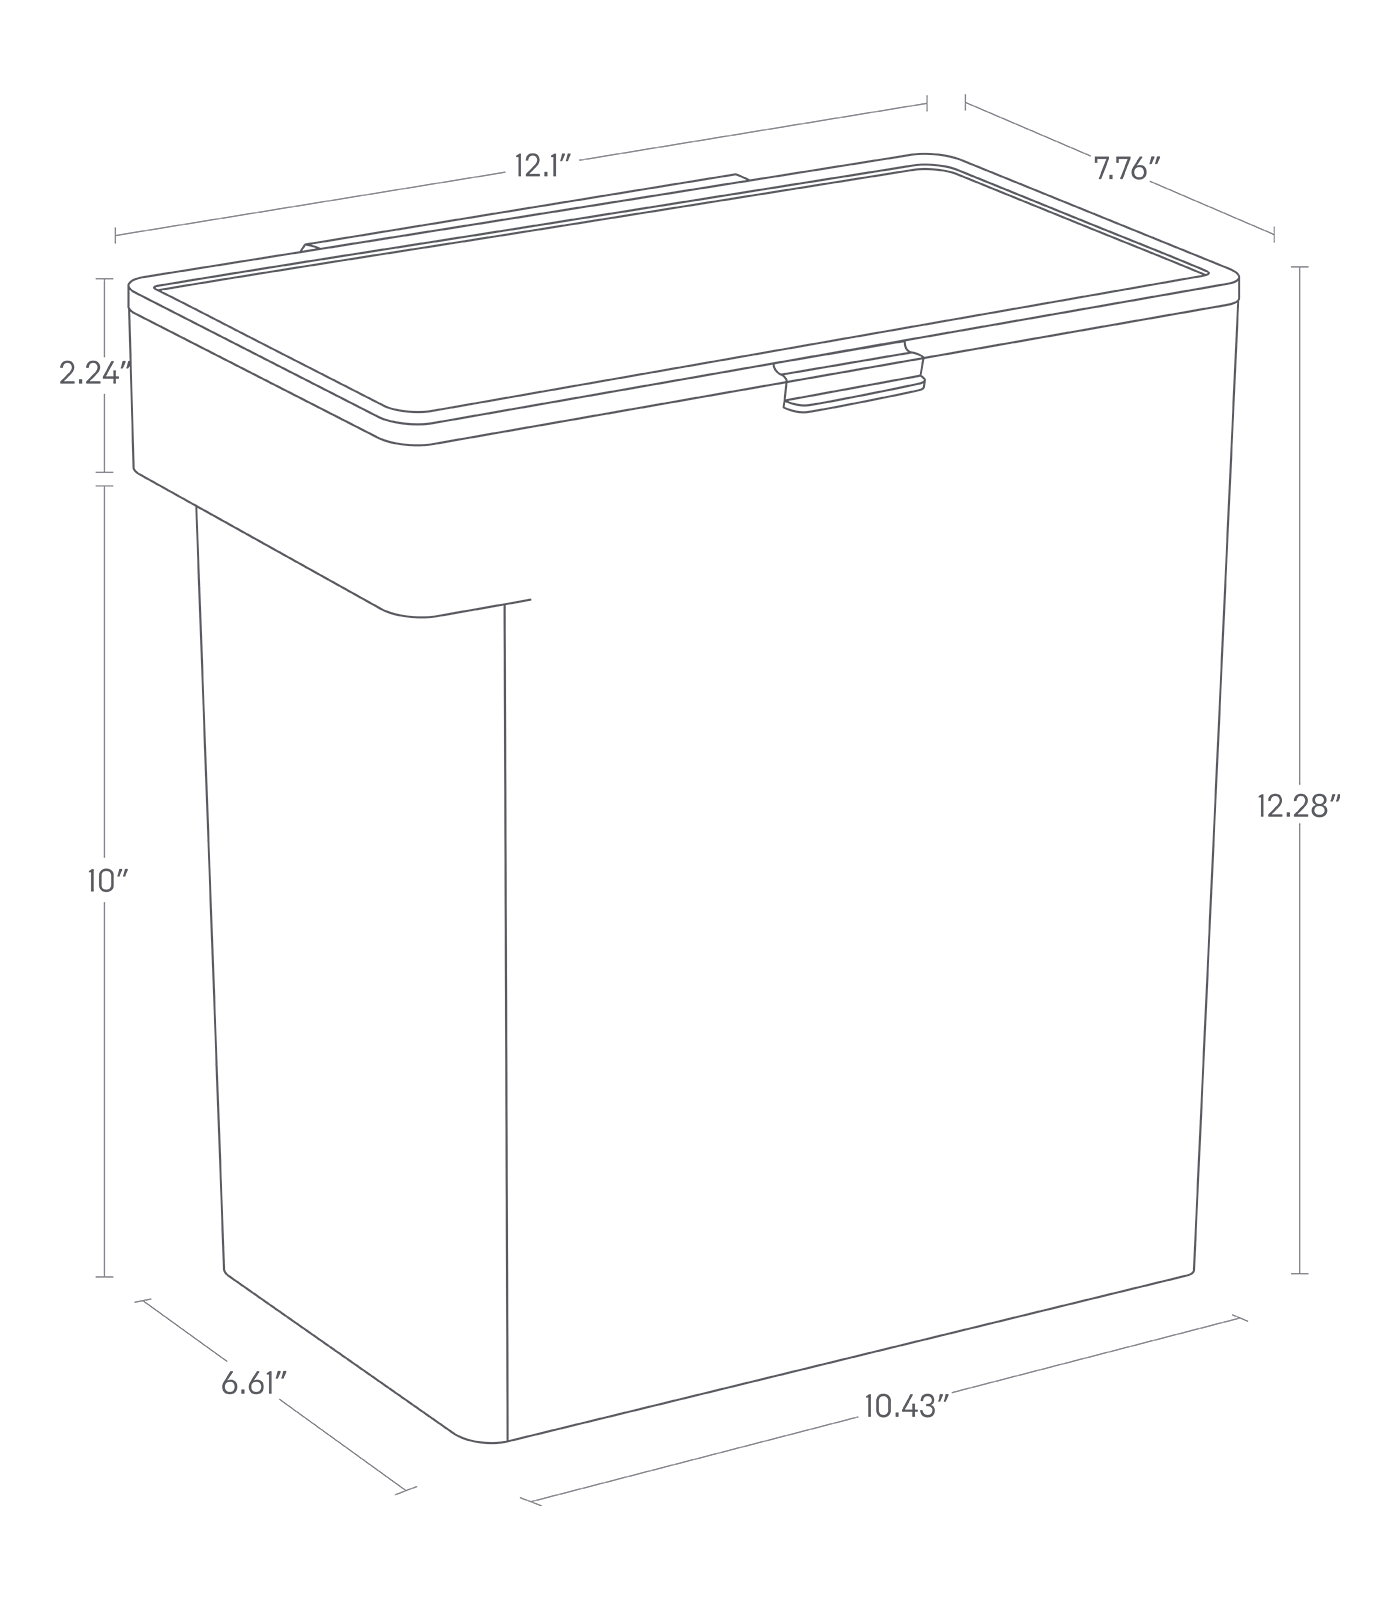 Dimension image for Airtight Pet Food Container showing length of 10.43